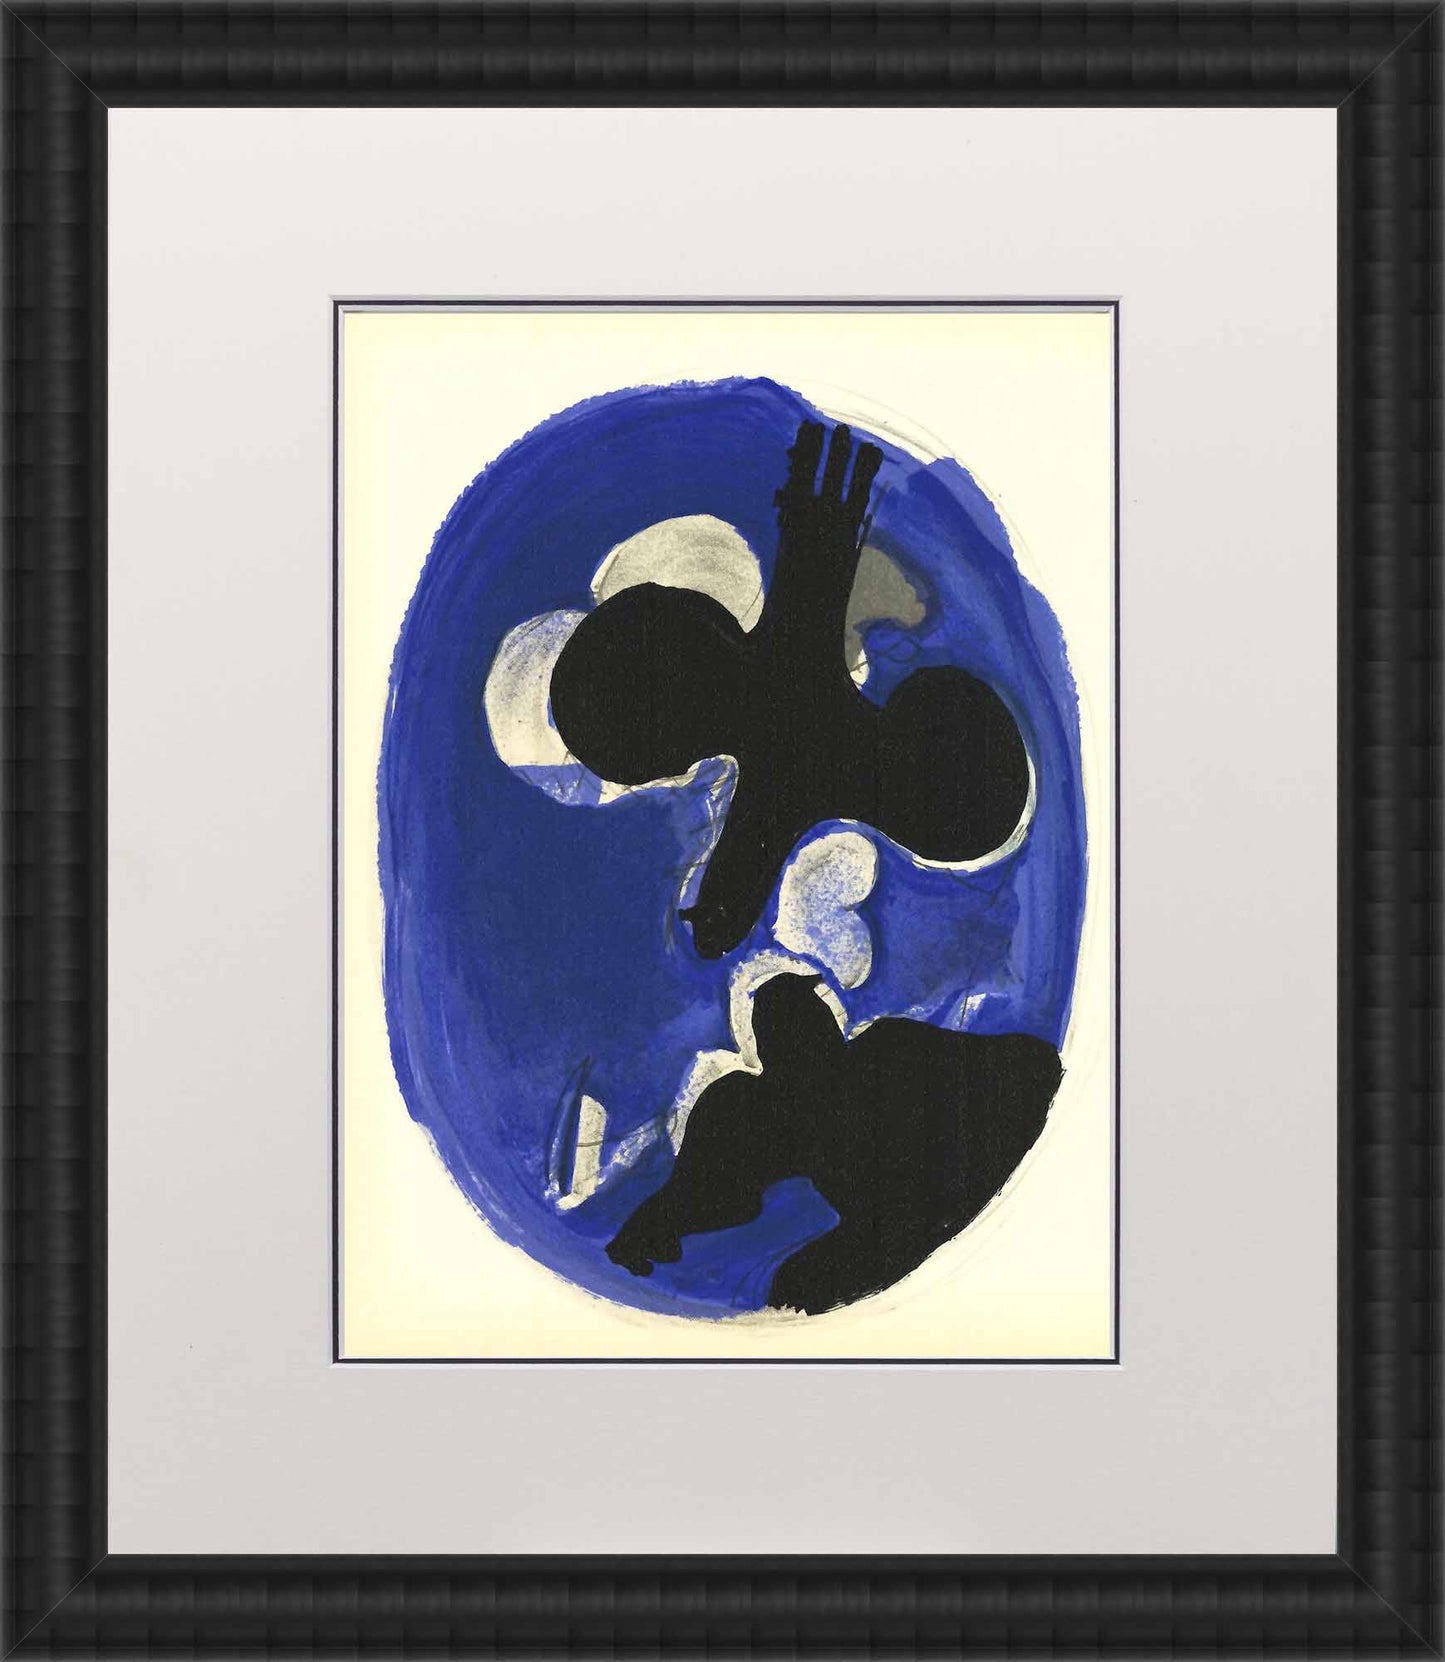 Georges Braque, "Untitled XII"